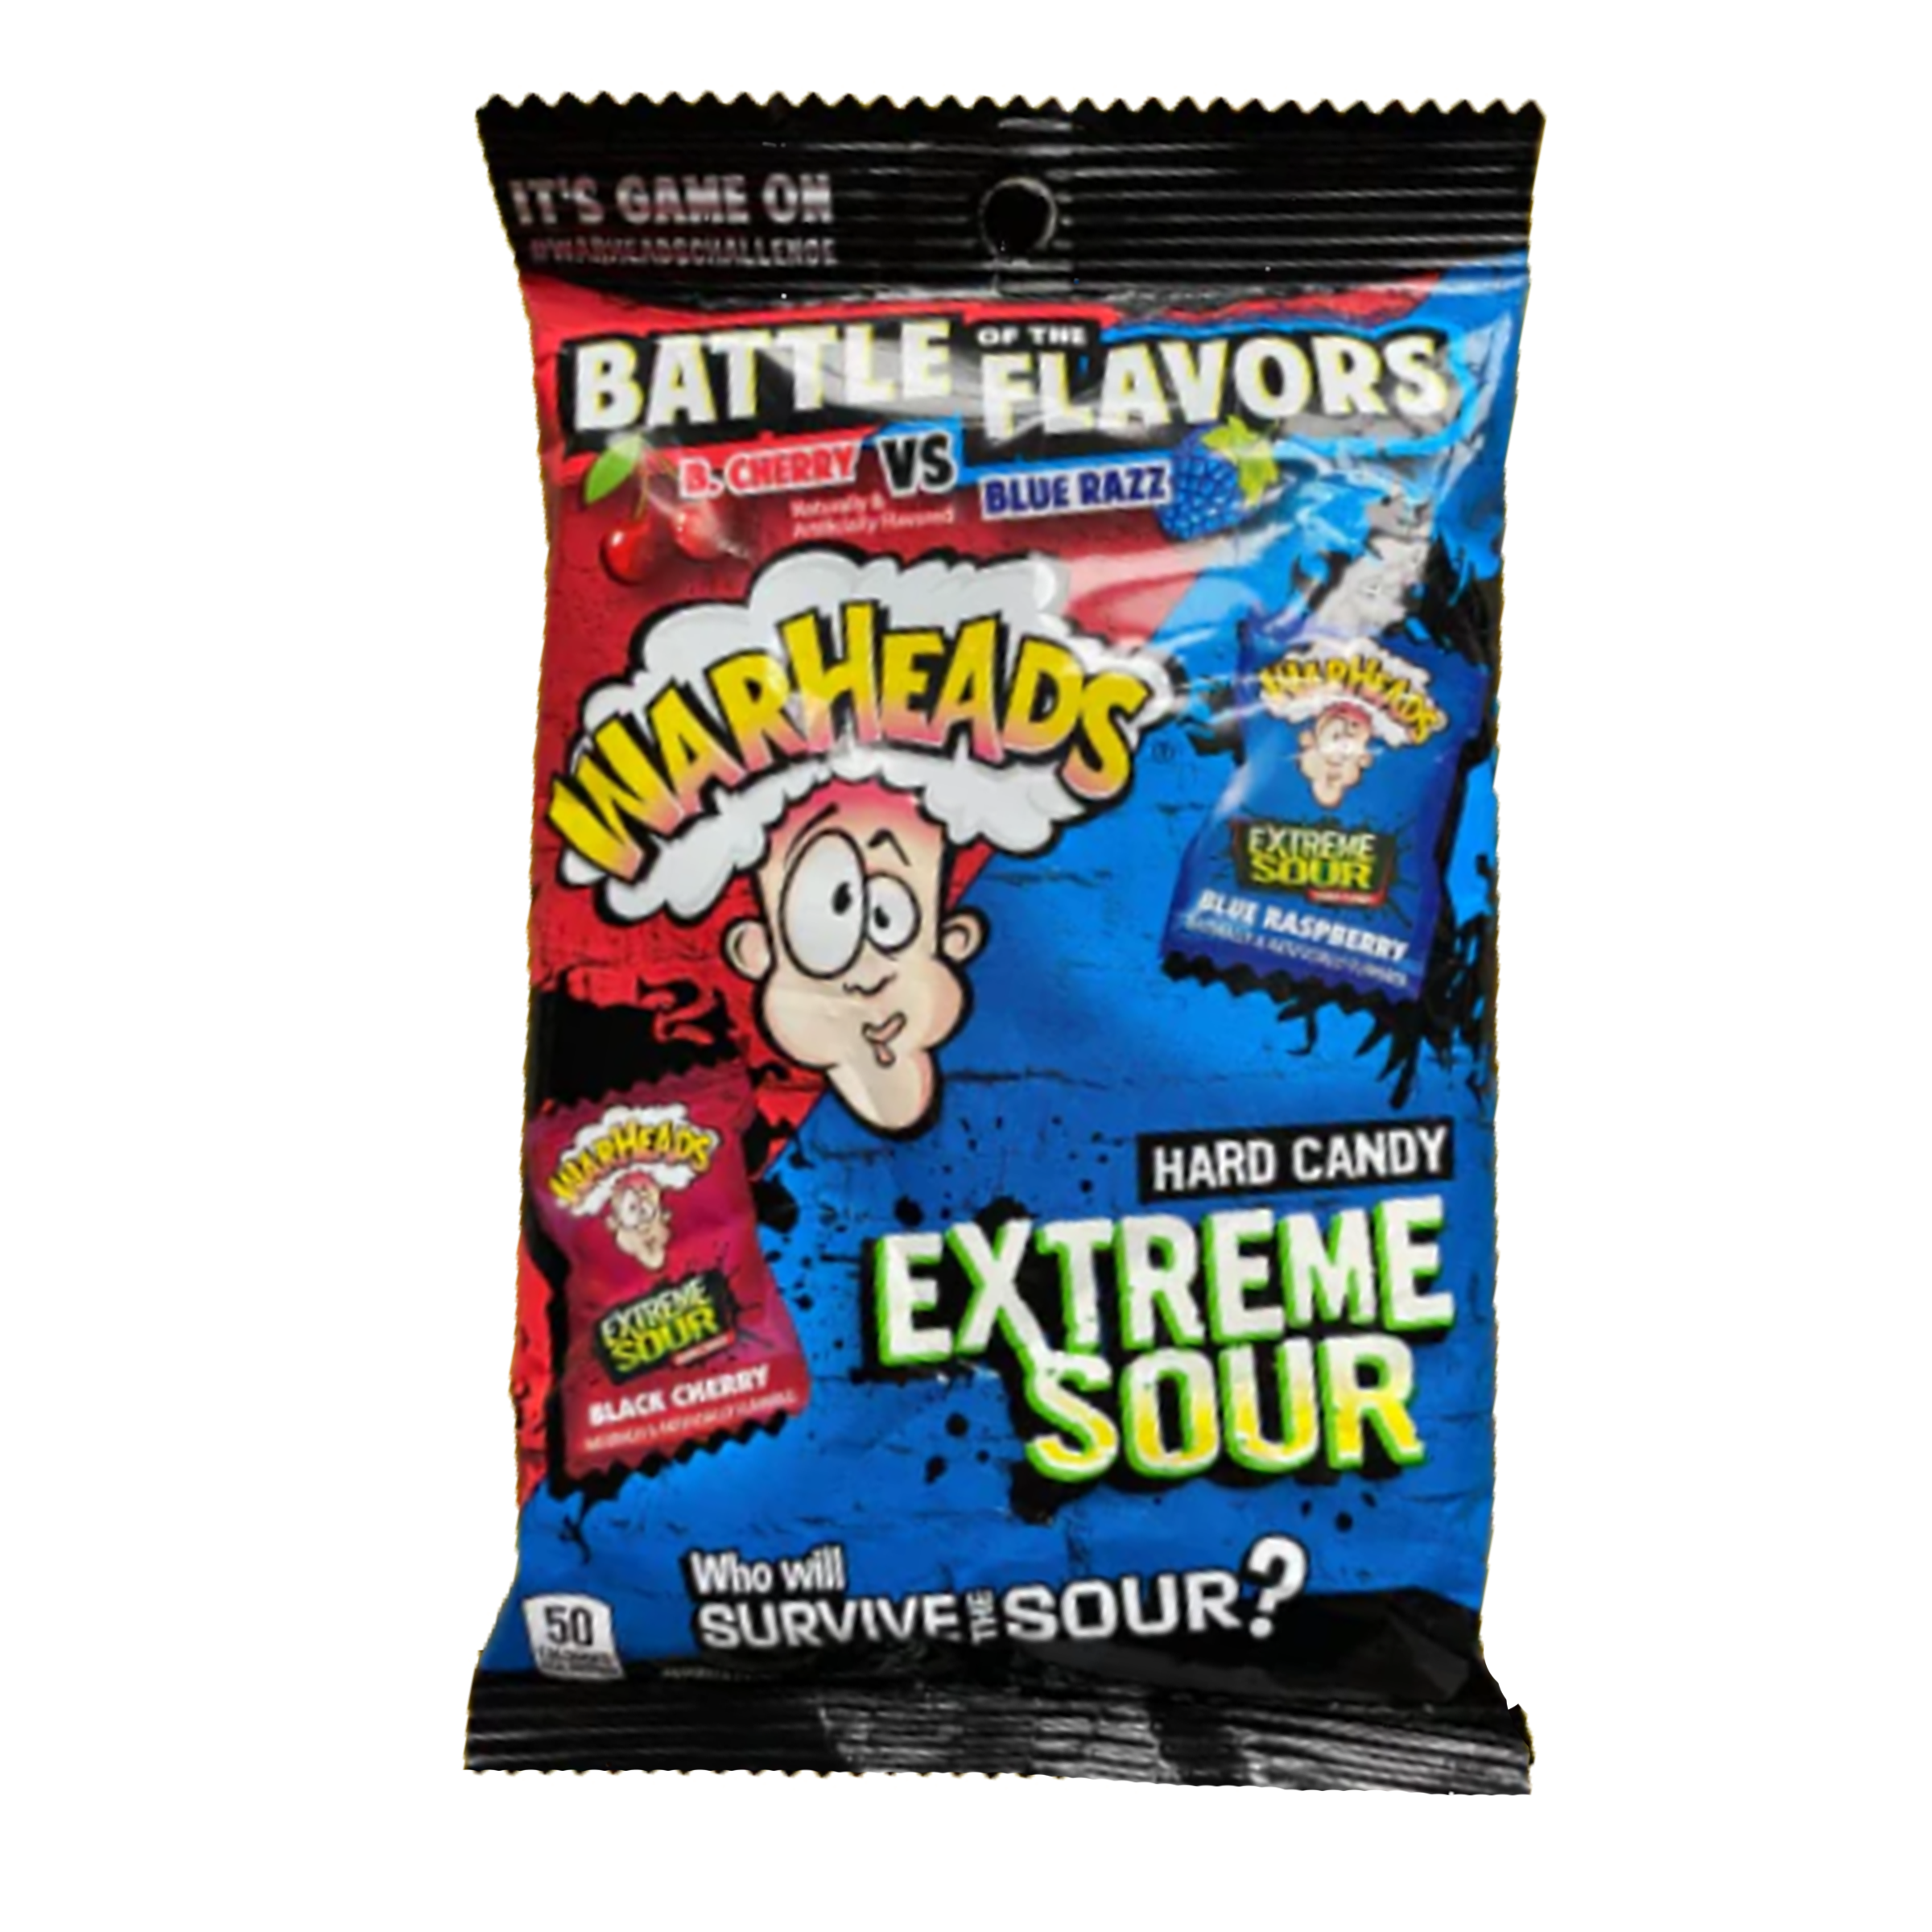 Warheads Extreme Sour - Battle of the Flavours